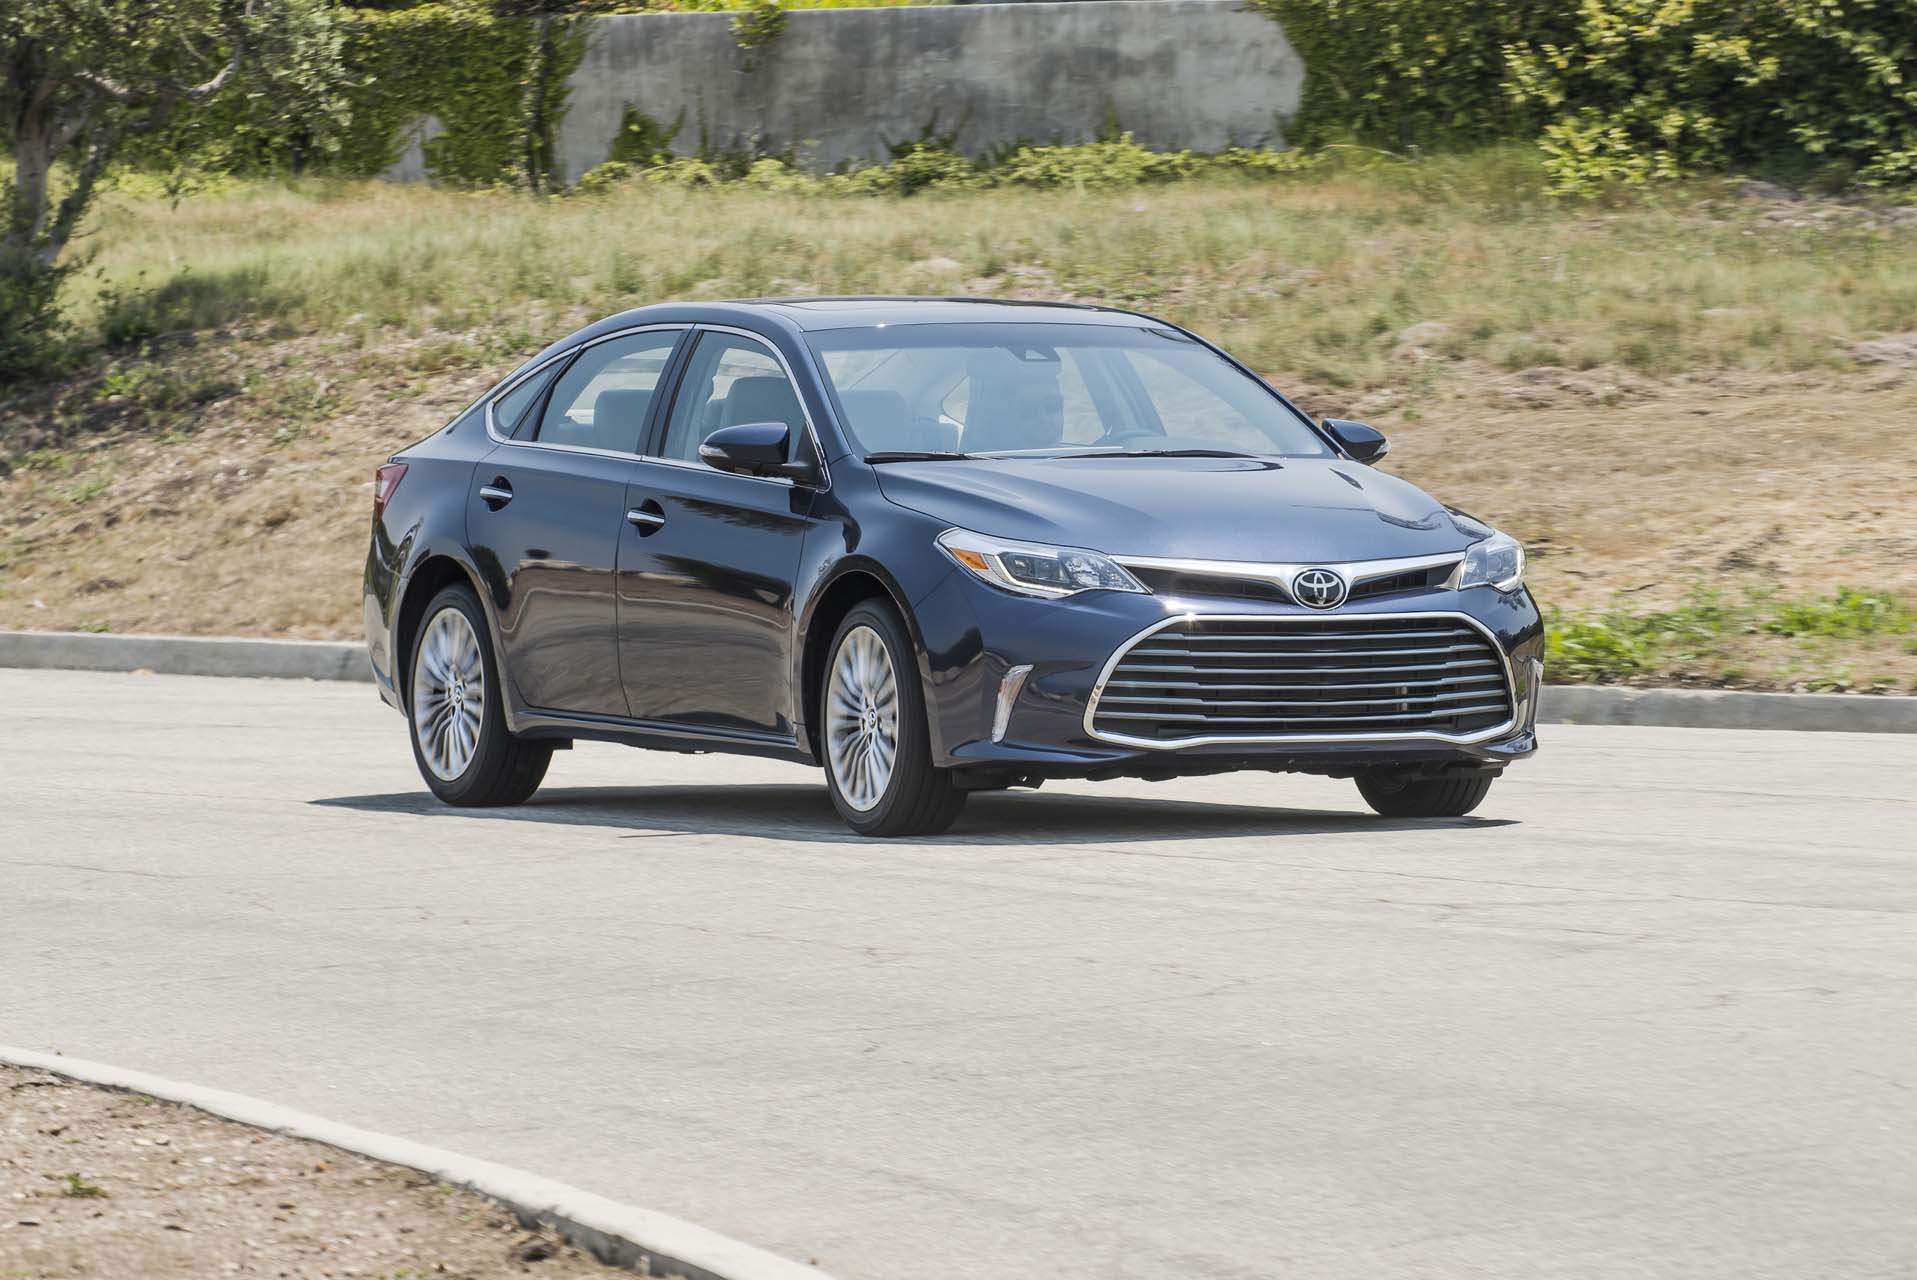 2018 Toyota Avalon Review & Ratings